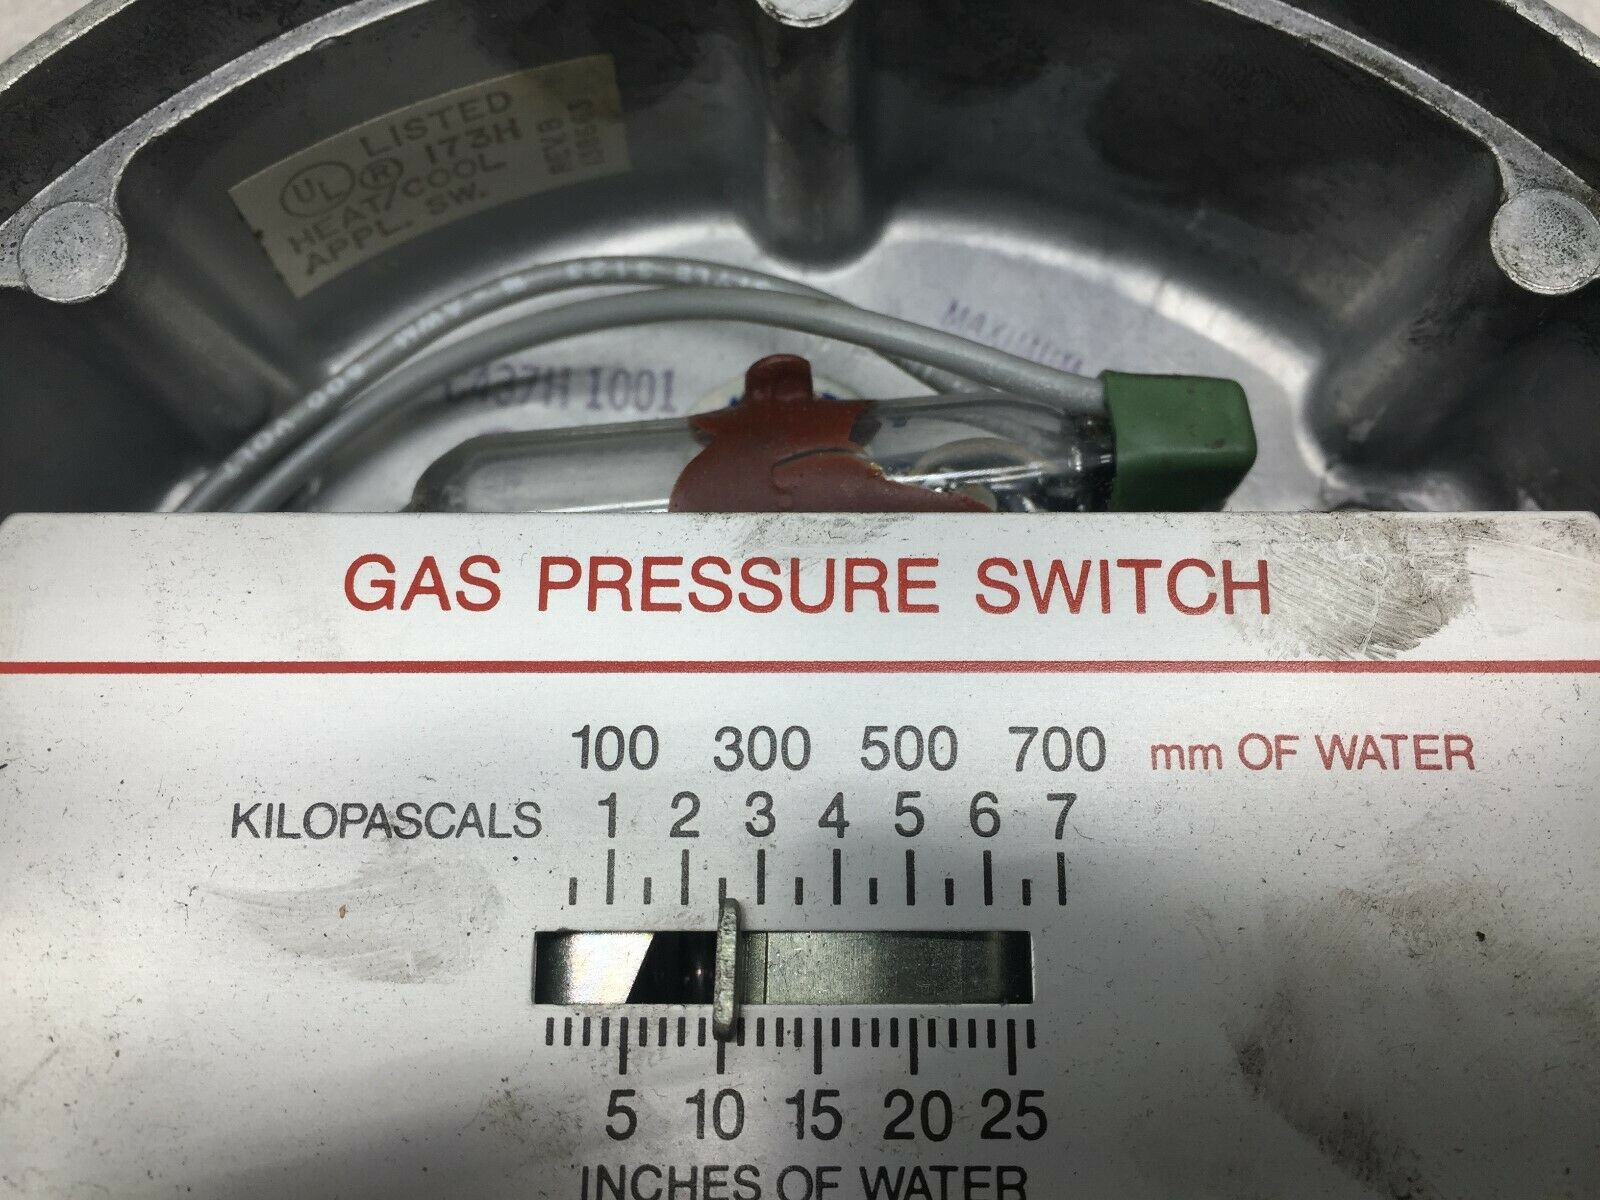 USED HONEYWELL GAS PRESSURE SWITCH (MISSING LENS) C437H1001